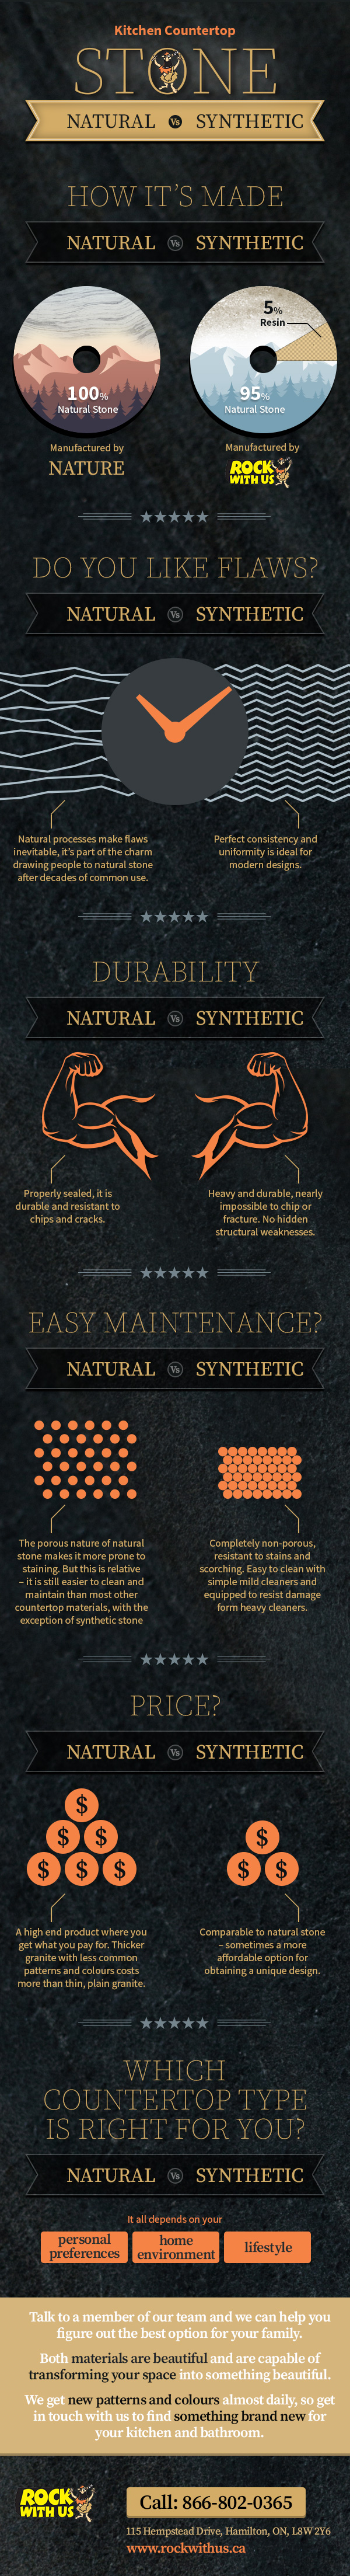 Natural stone vs. Snythetic stone infographic